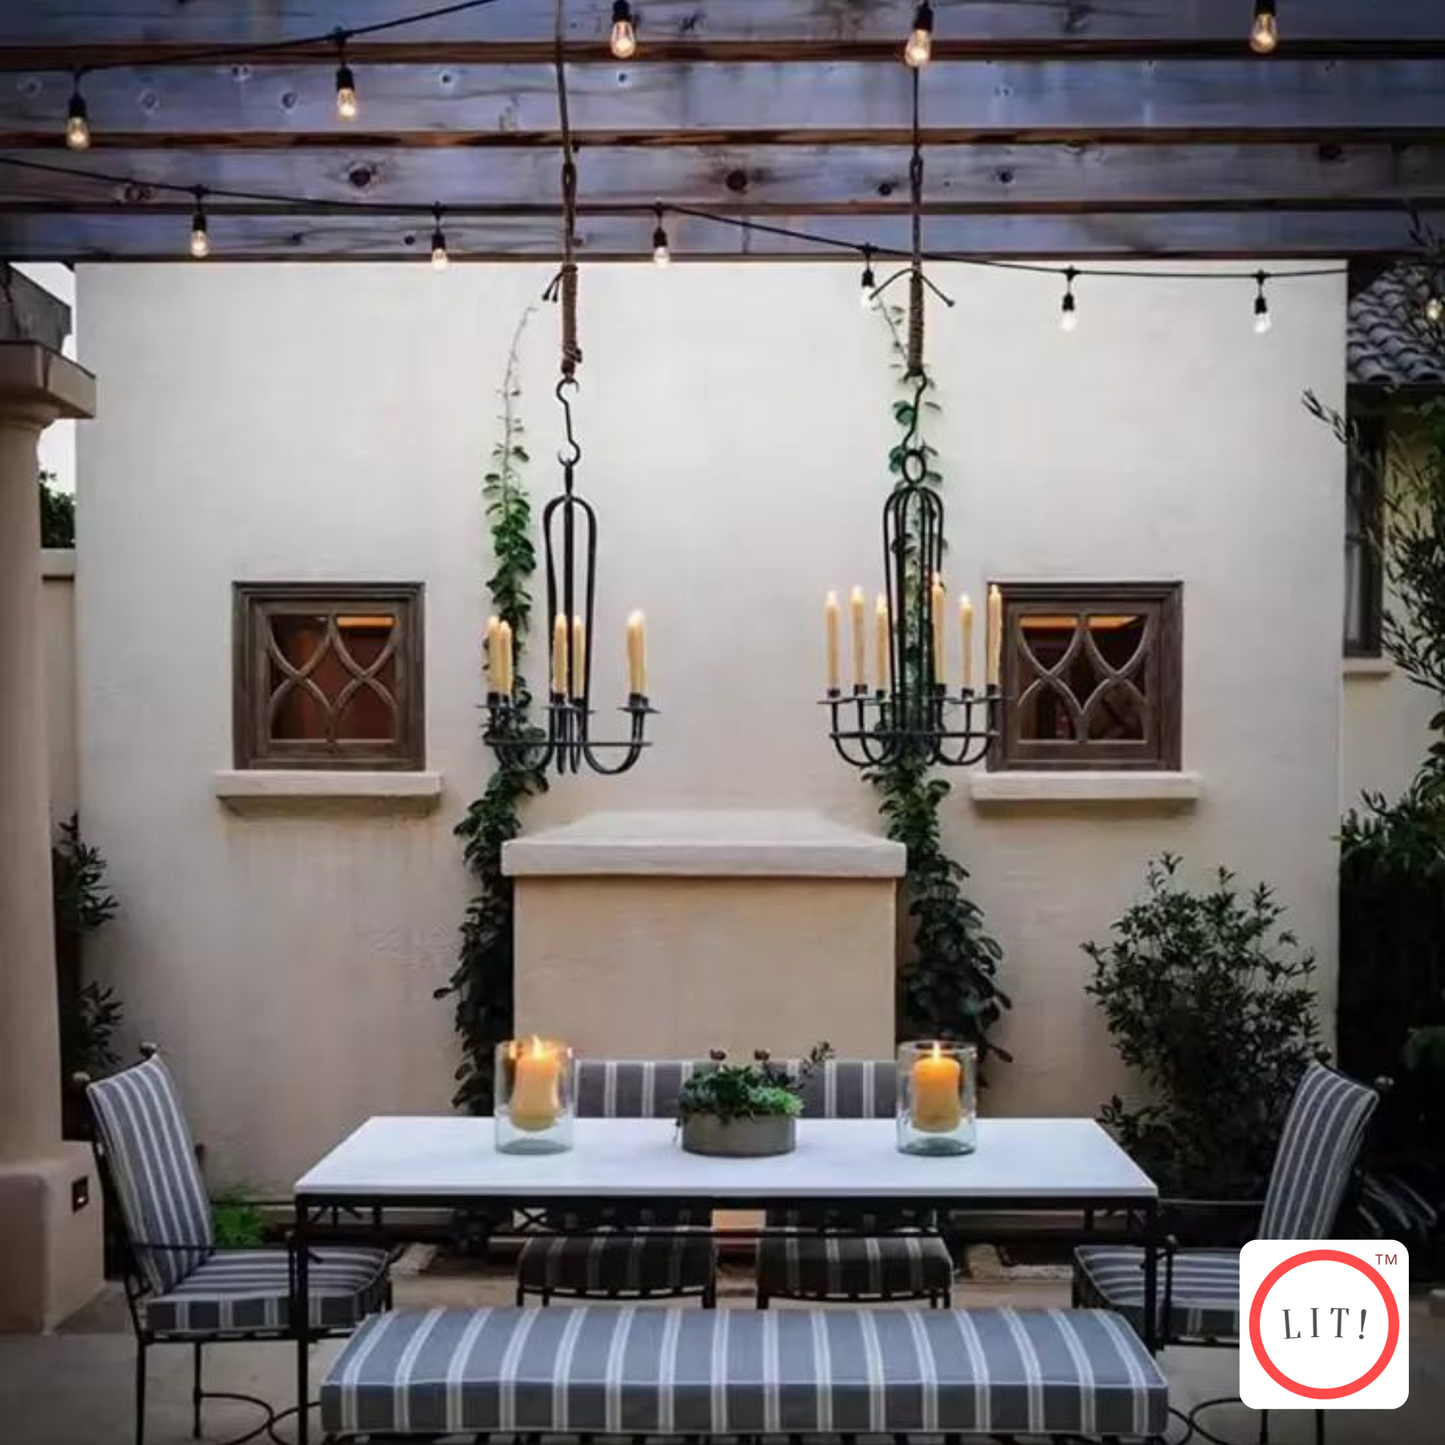 Solar Powered Outdoor Patio Hanging Lights for Backyard Garden Party